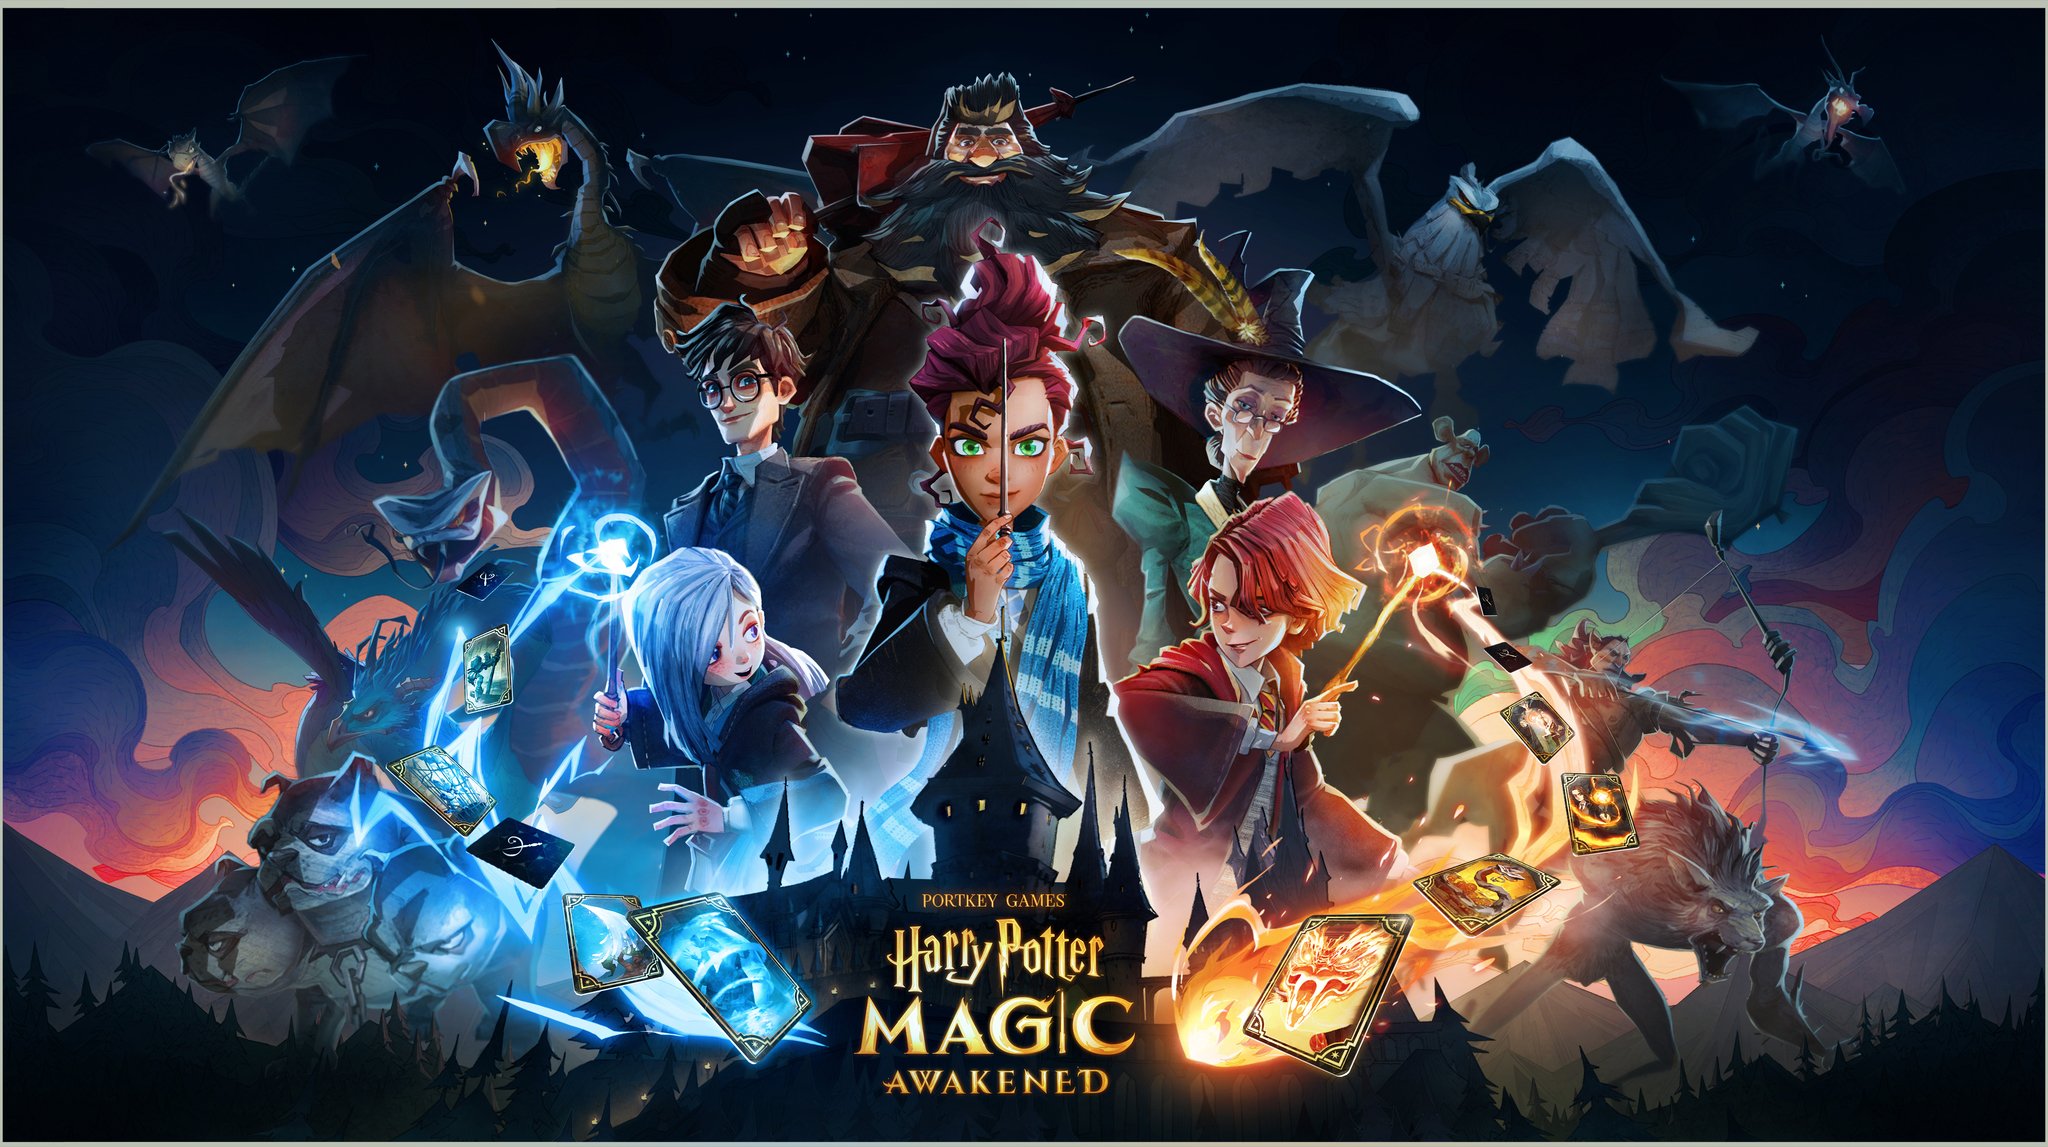 Harry Potter: Magic Awakened Free-to-play Collectible Card Roleplay Game  Rolls Out On App Store And Google Play. - Geek Slop